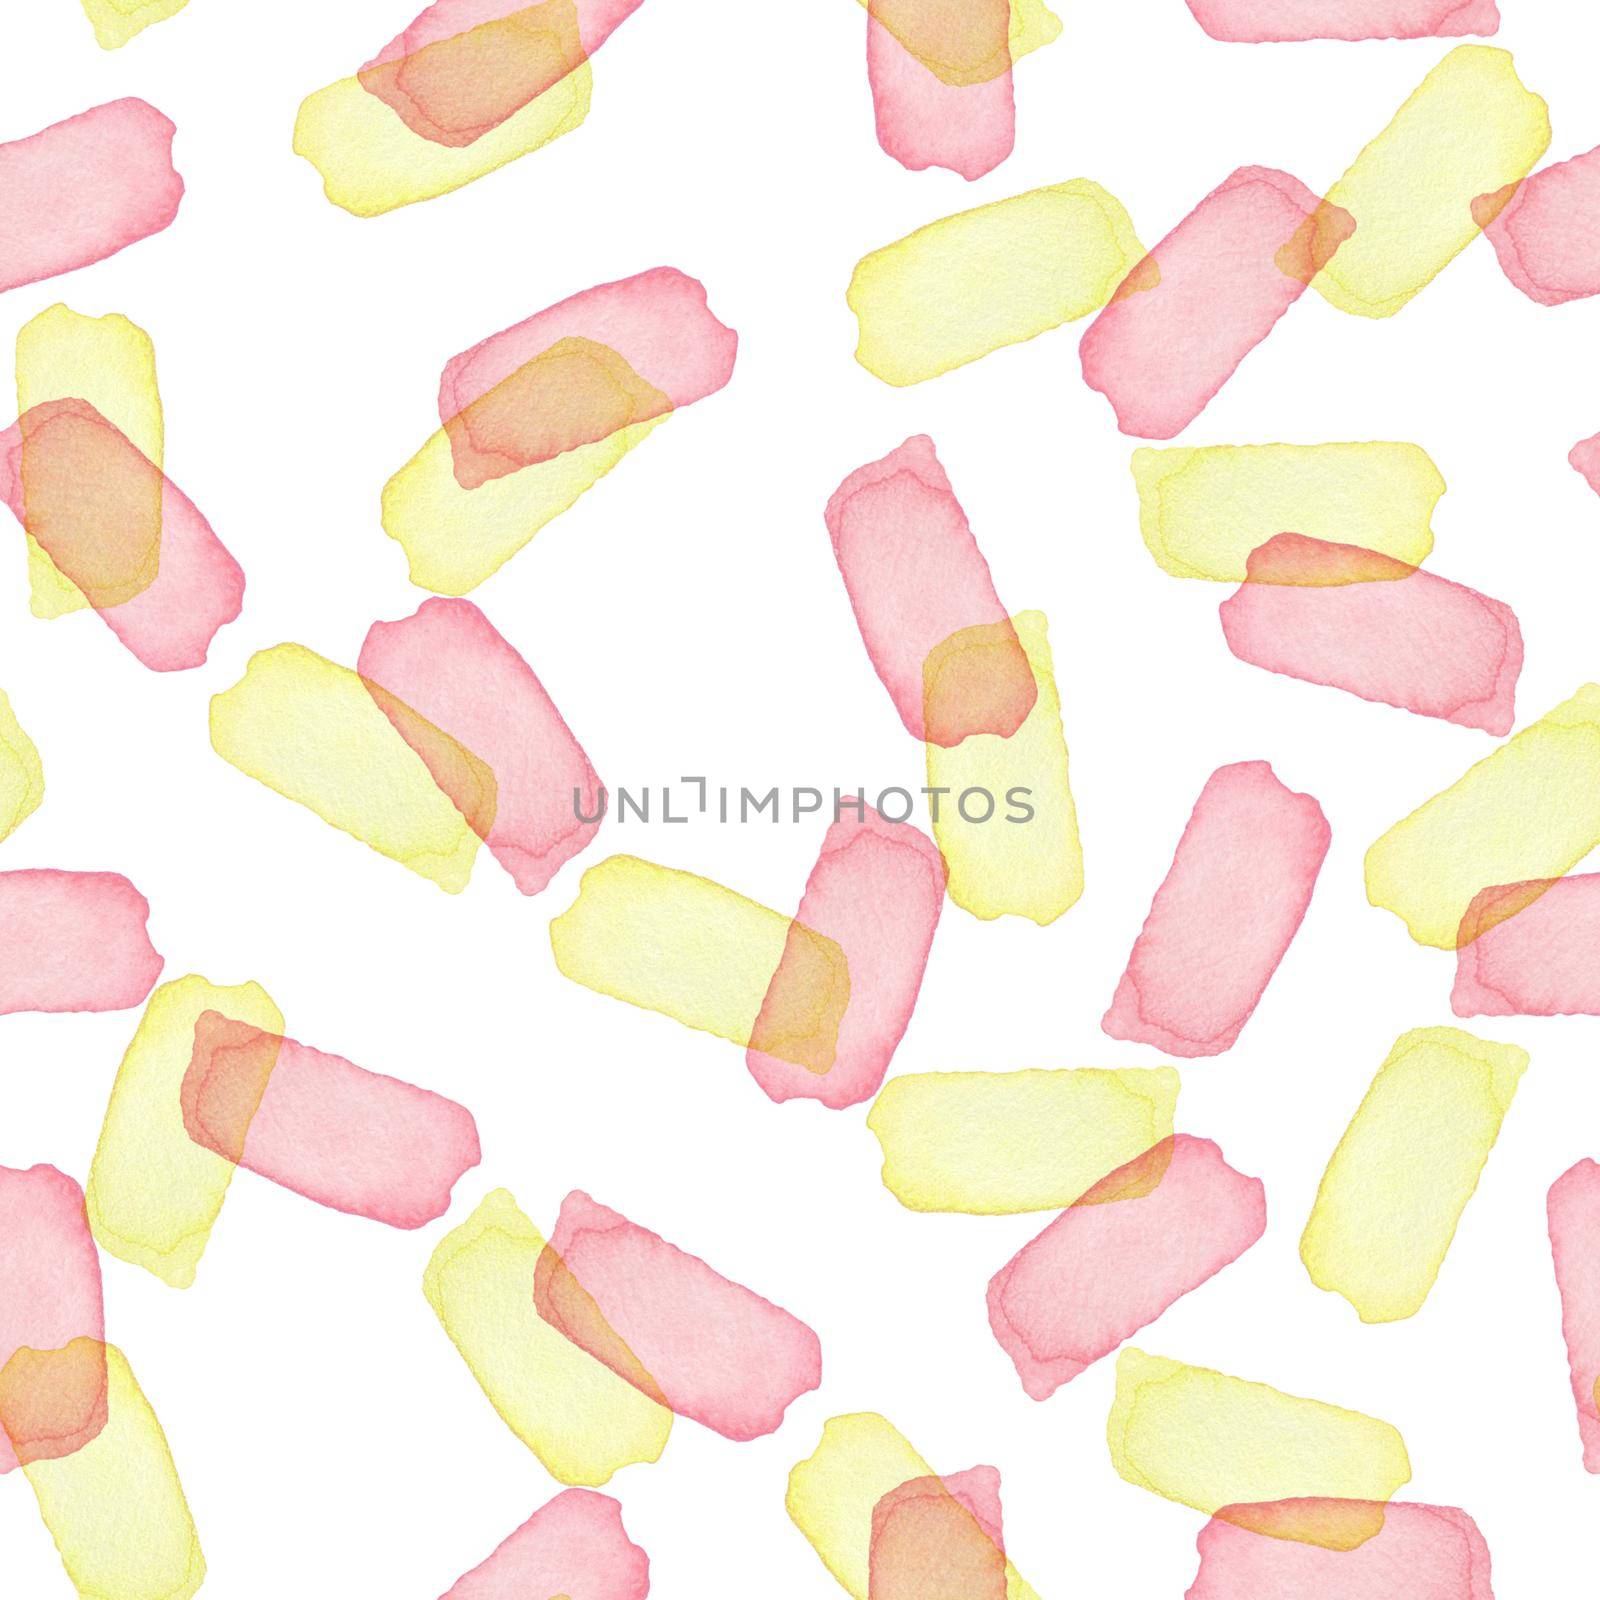 Hand Painted Brush Stroke Seamless Watercolor Pattern. Abstract watercolour shapes in Pink Girly and Light Yellow Color. Artistic Design.